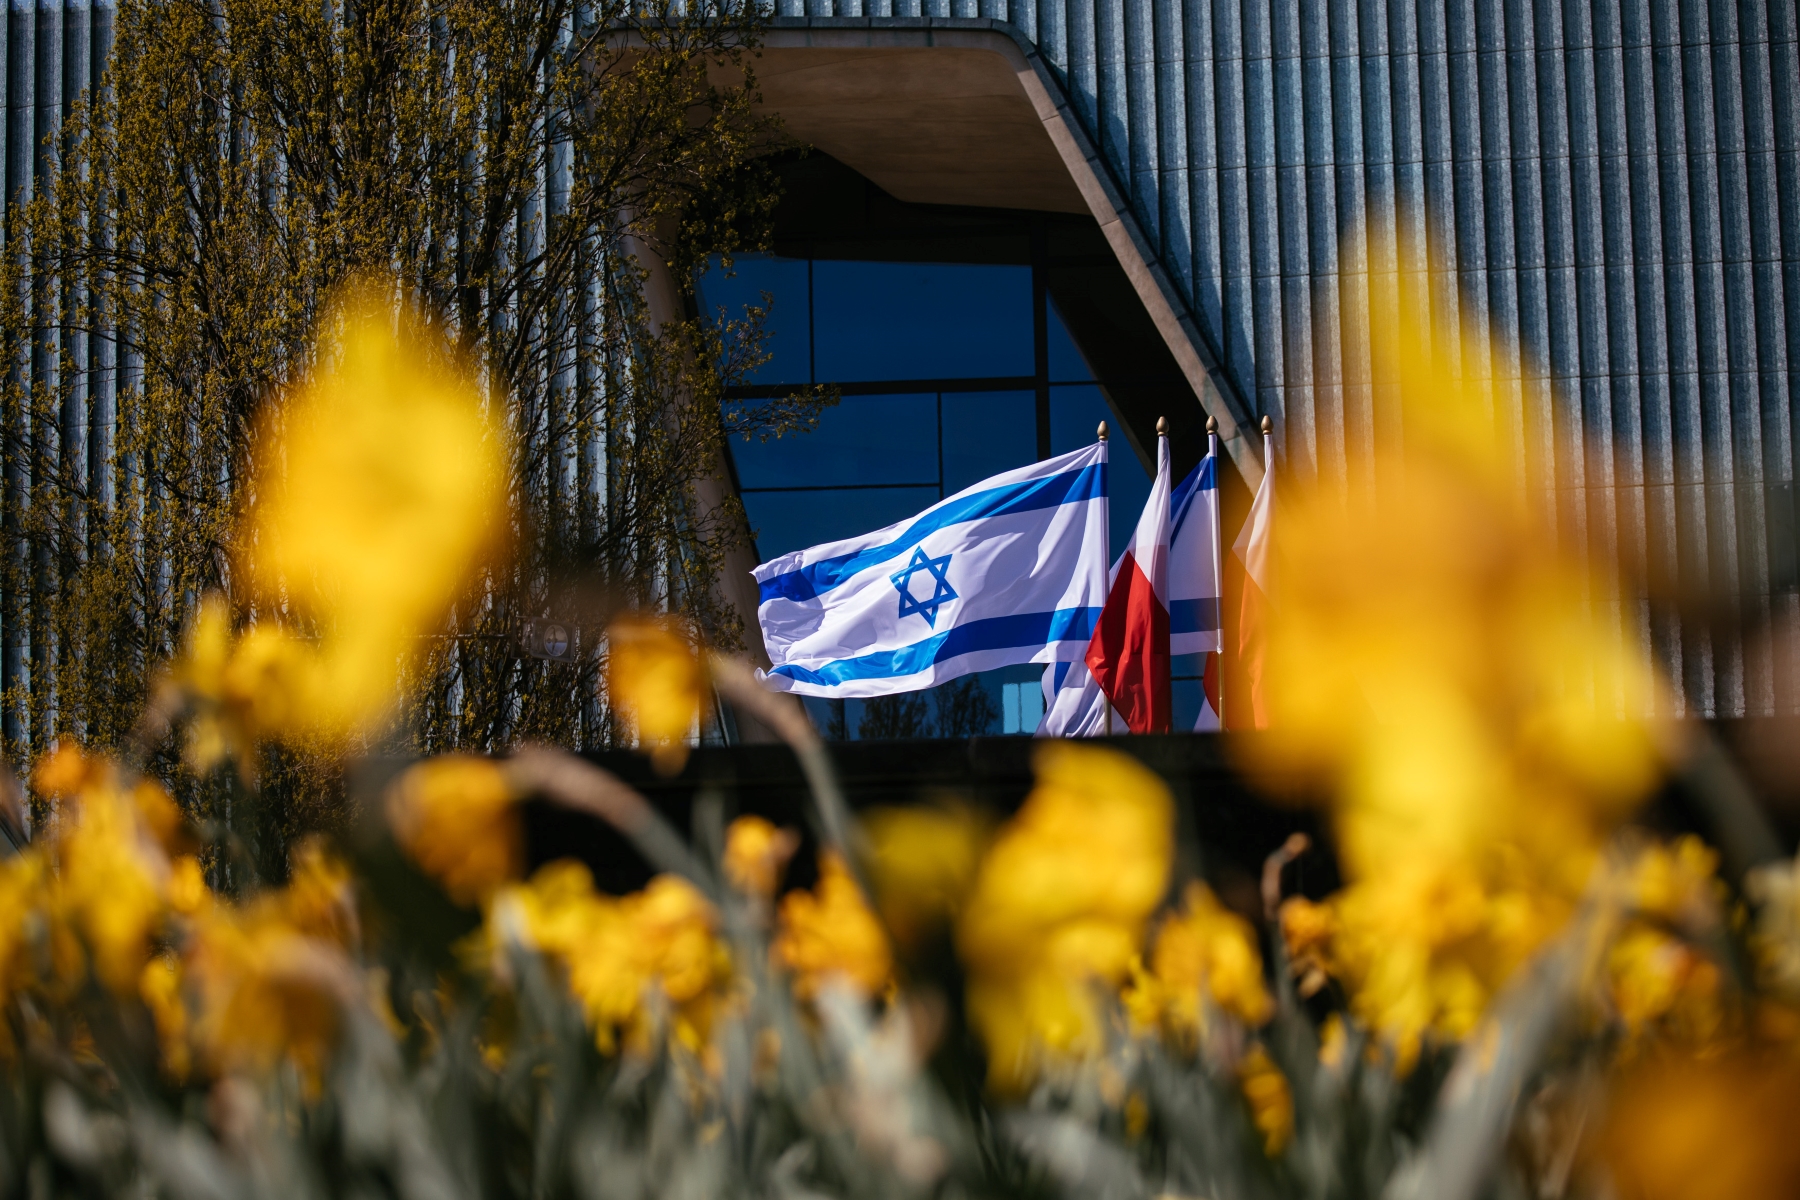 Polish and Israeli flags waving next to POLIN Museum building. In front of museum there is daffodil meadow.